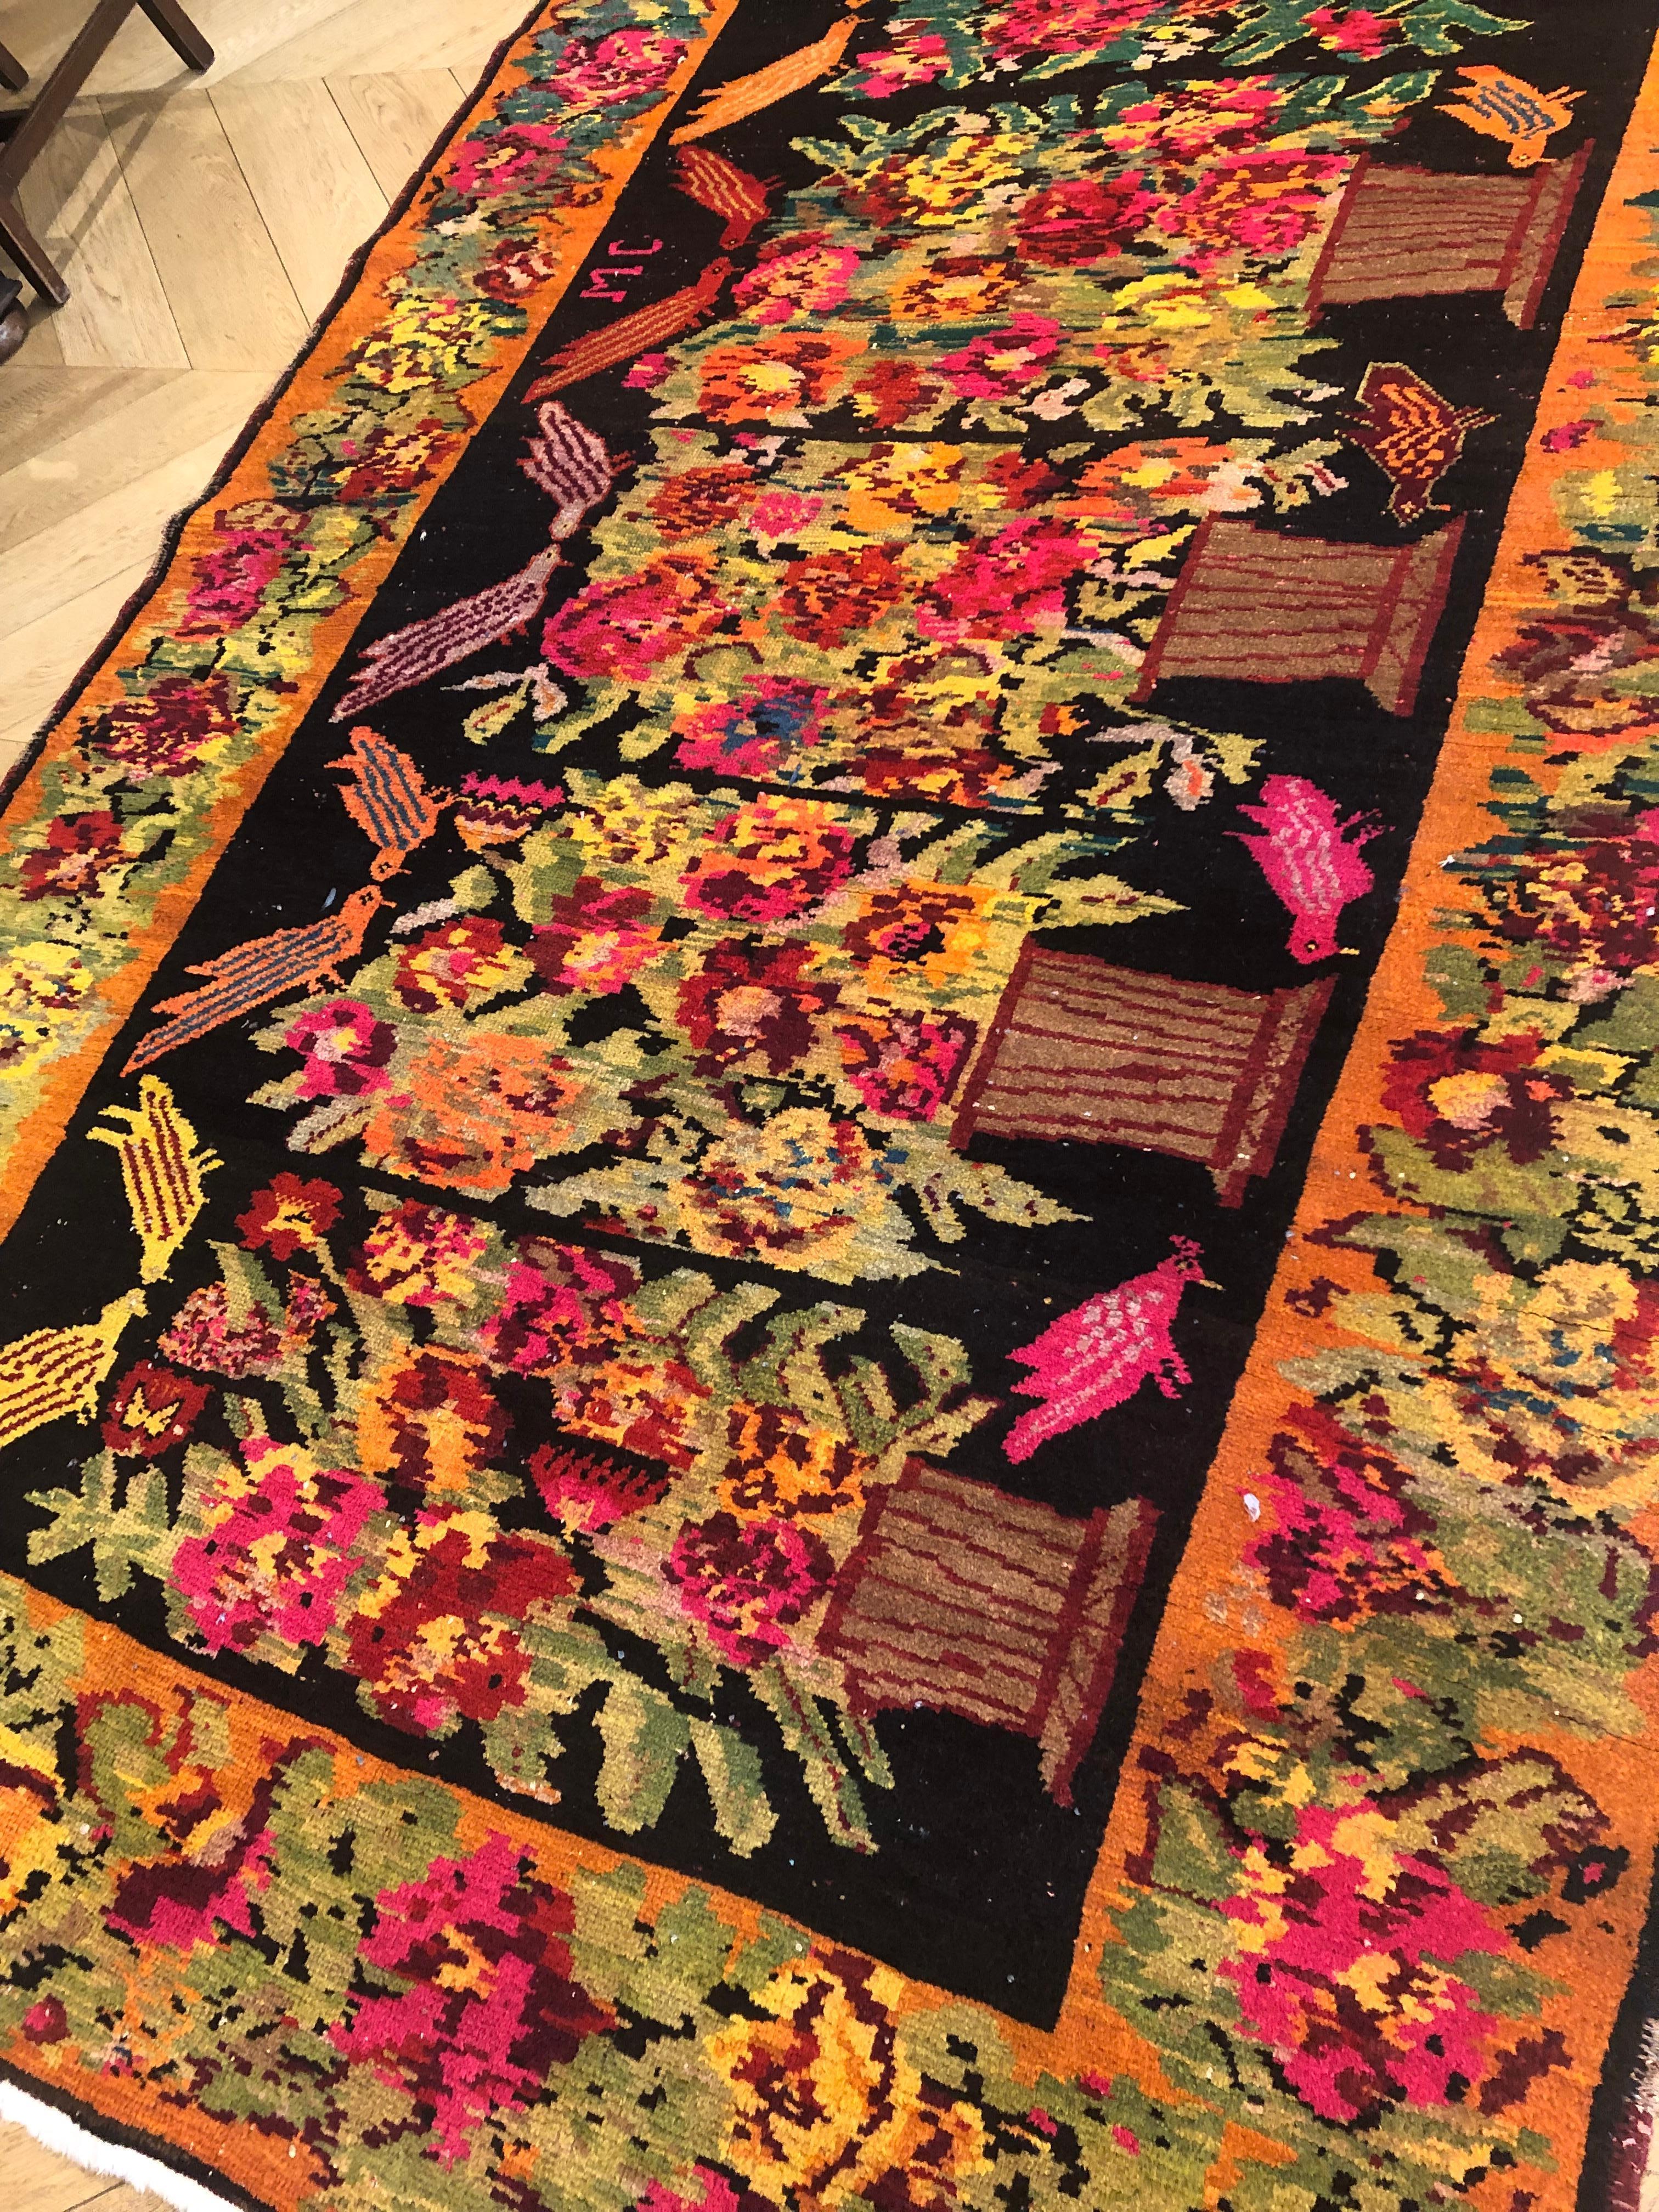 Hand-Knotted 20th Century Black Garden and Brids Karabagh Rug, ca 1920 For Sale